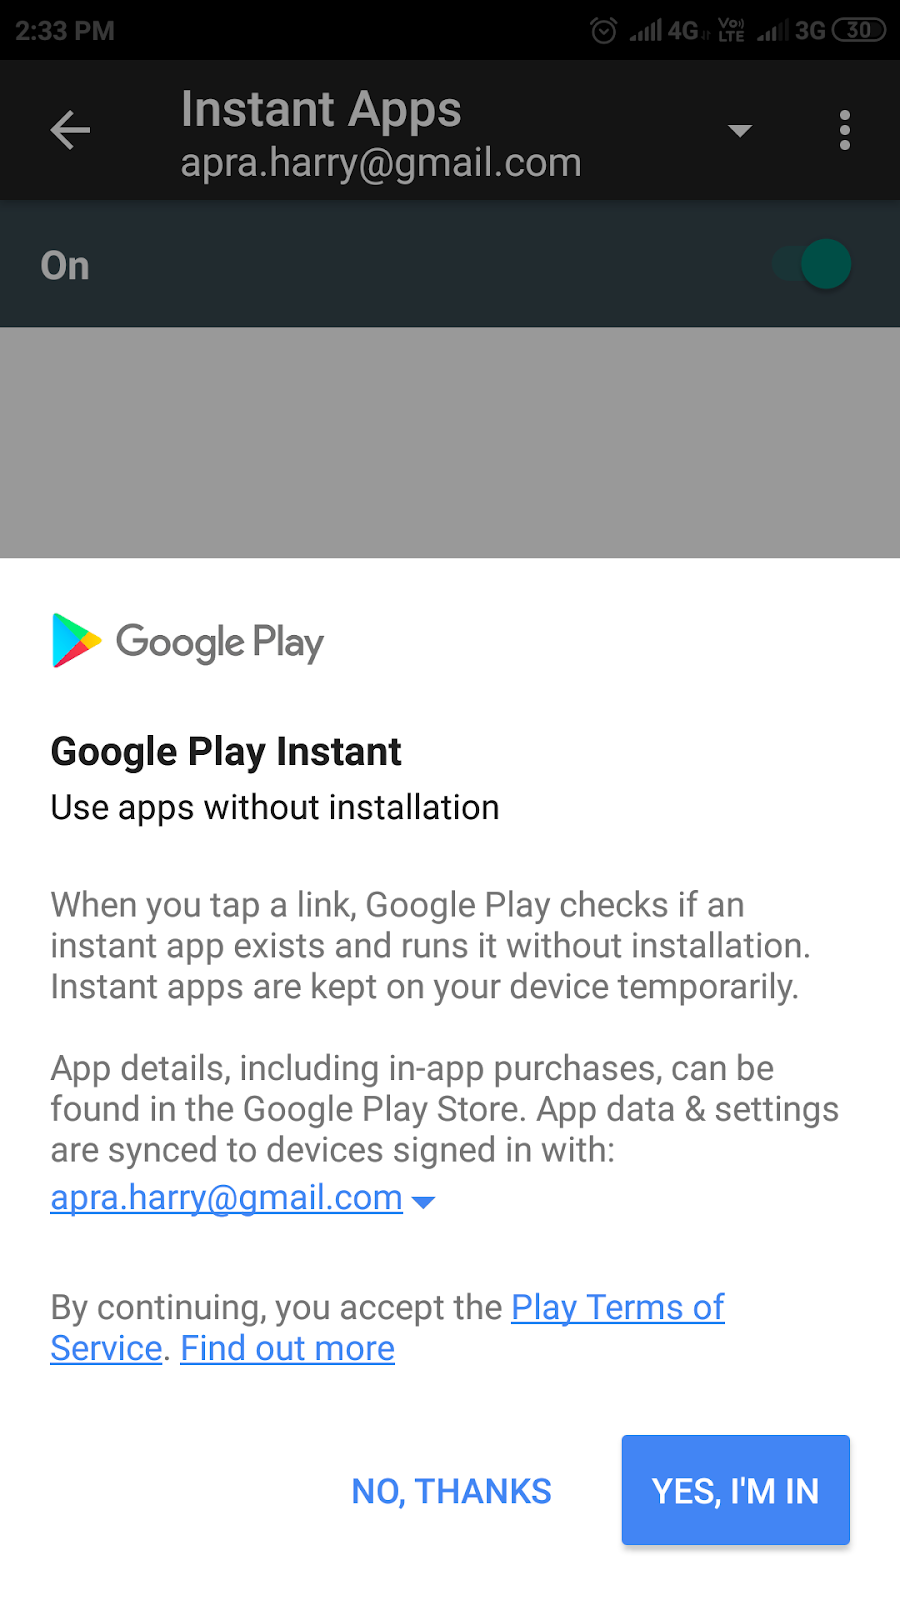 Boost Your Customer’s Experience With Instant Android Apps